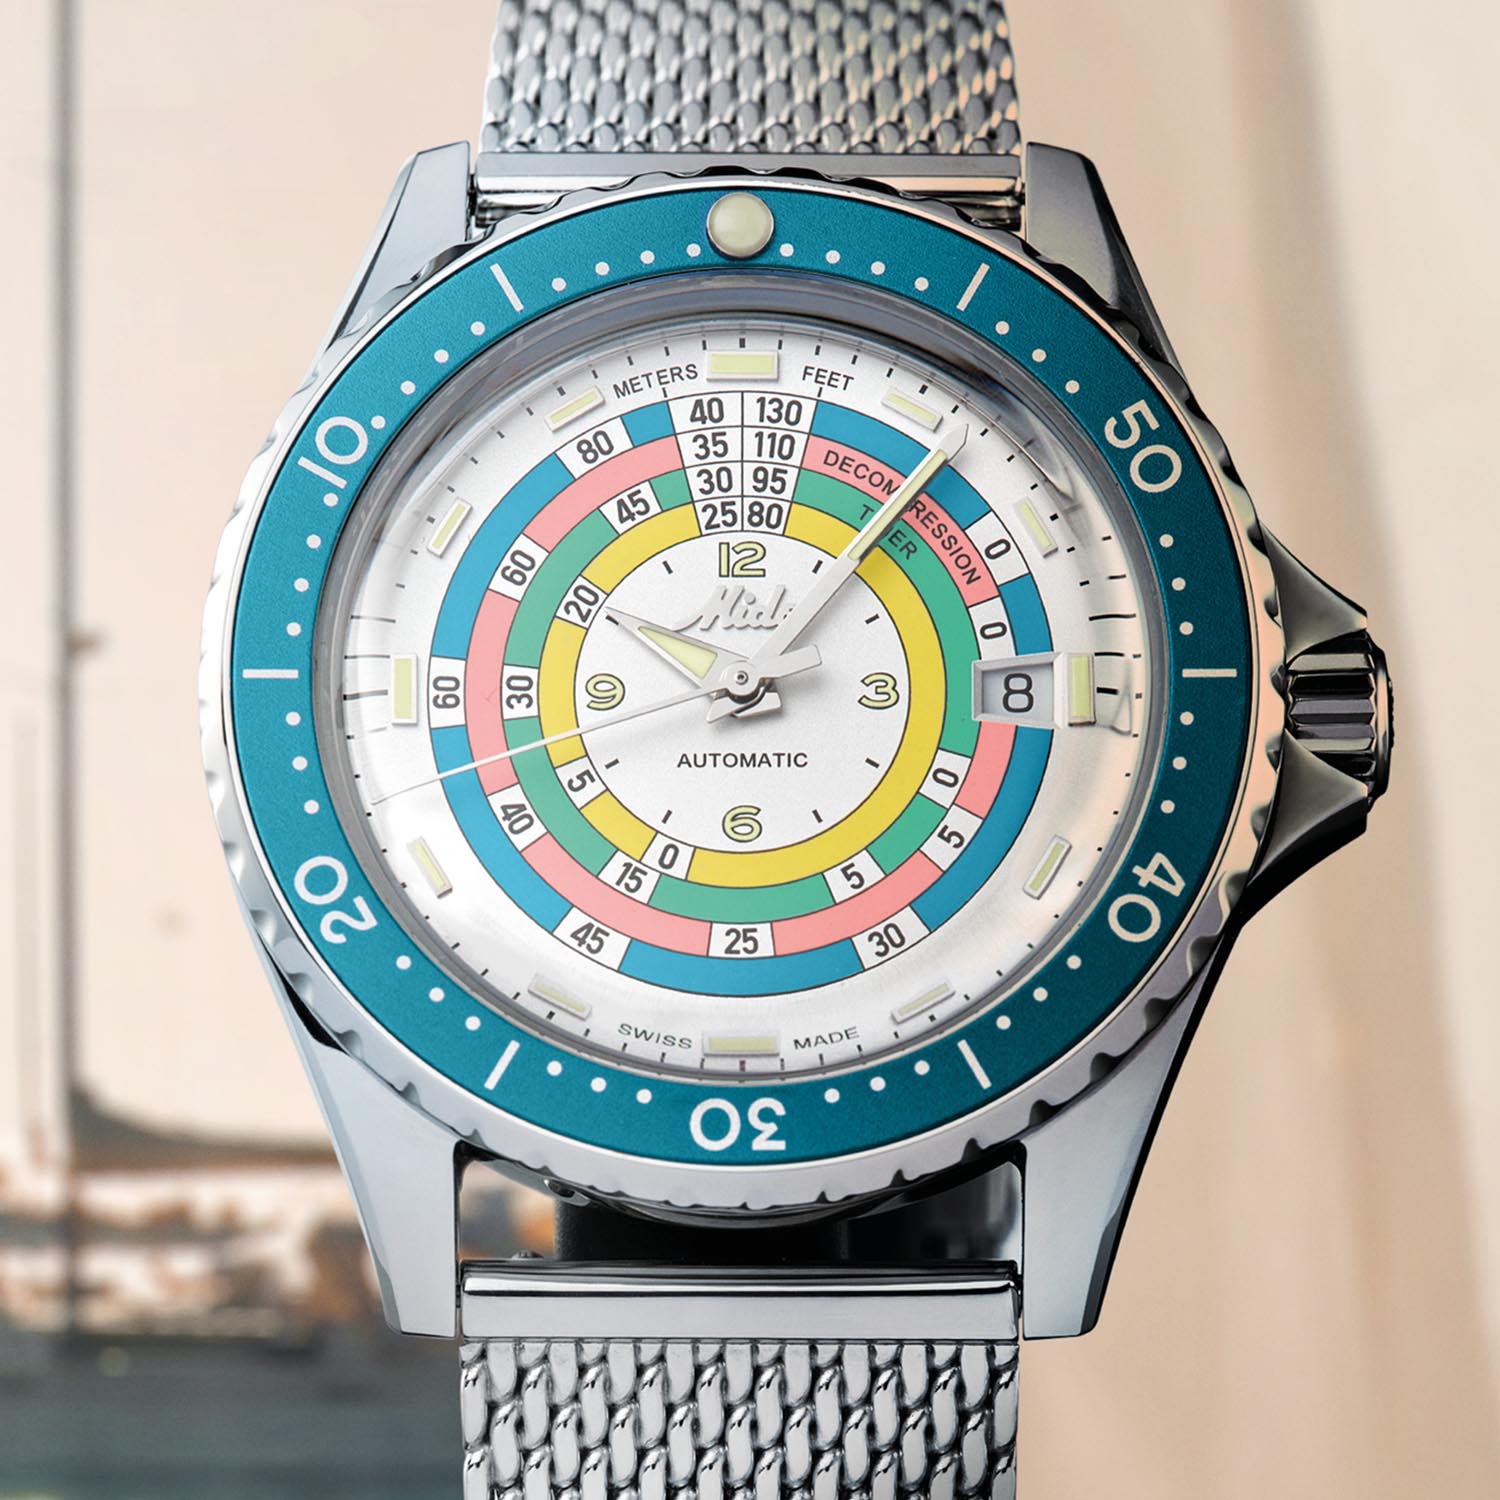 Mido Ocean Star Decompression Timer 1961 Turquoise Limited Edition - M026.807.11.031.00